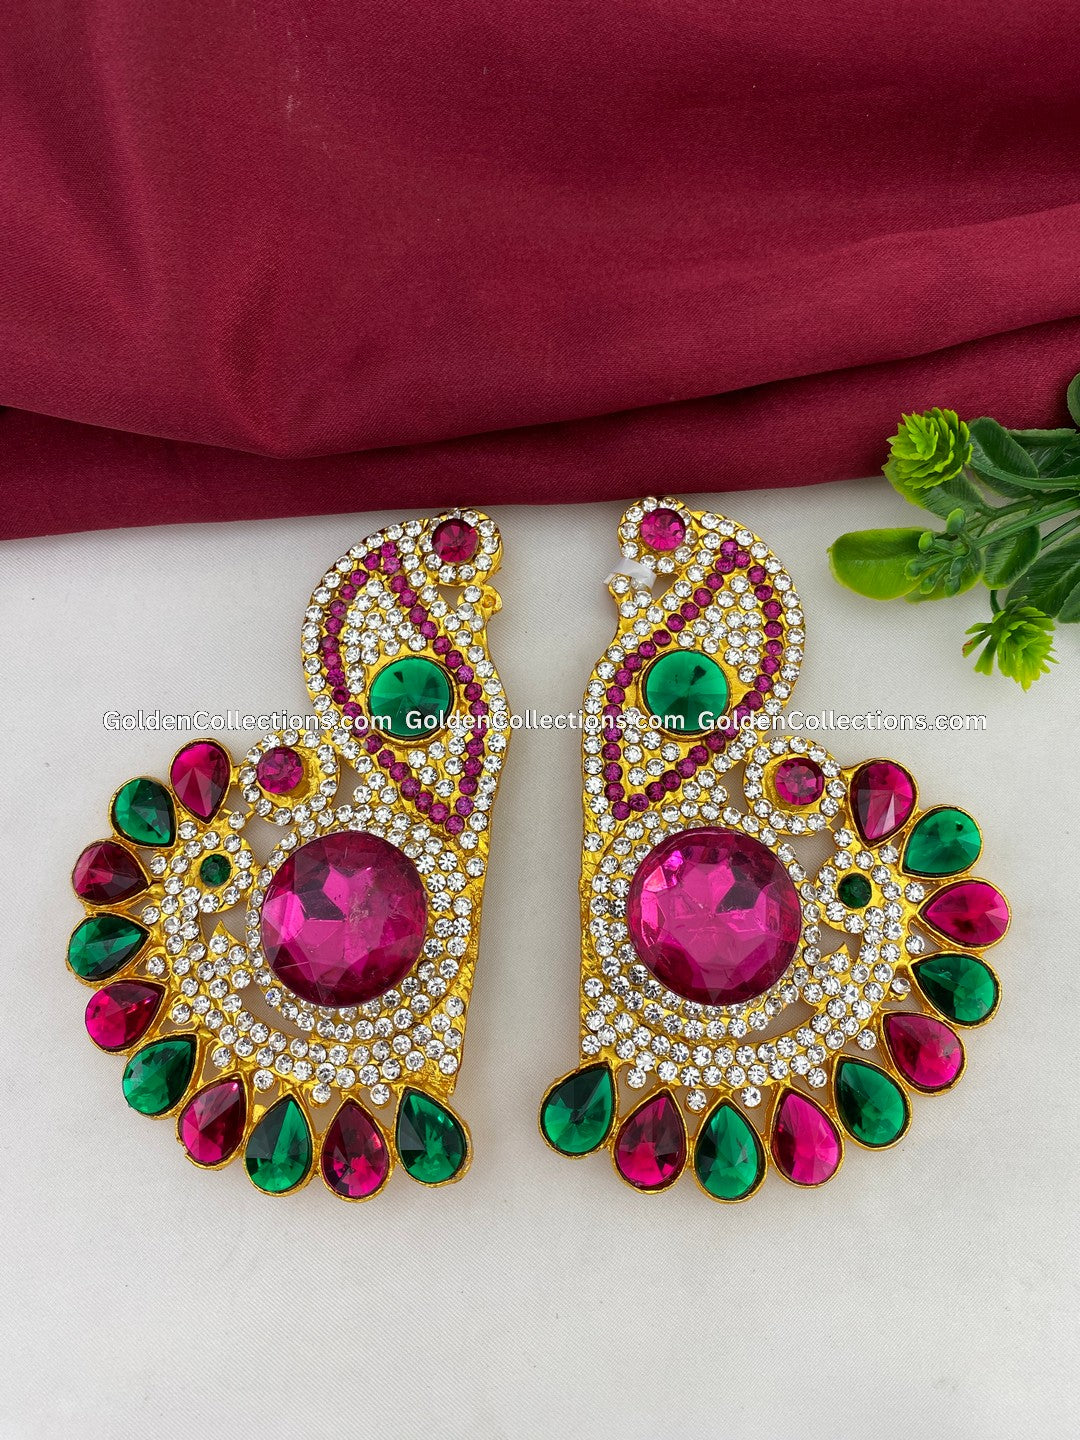 Classic Deity Earrings - Ornate Ear Ornaments - GoldenCollections DGE-059